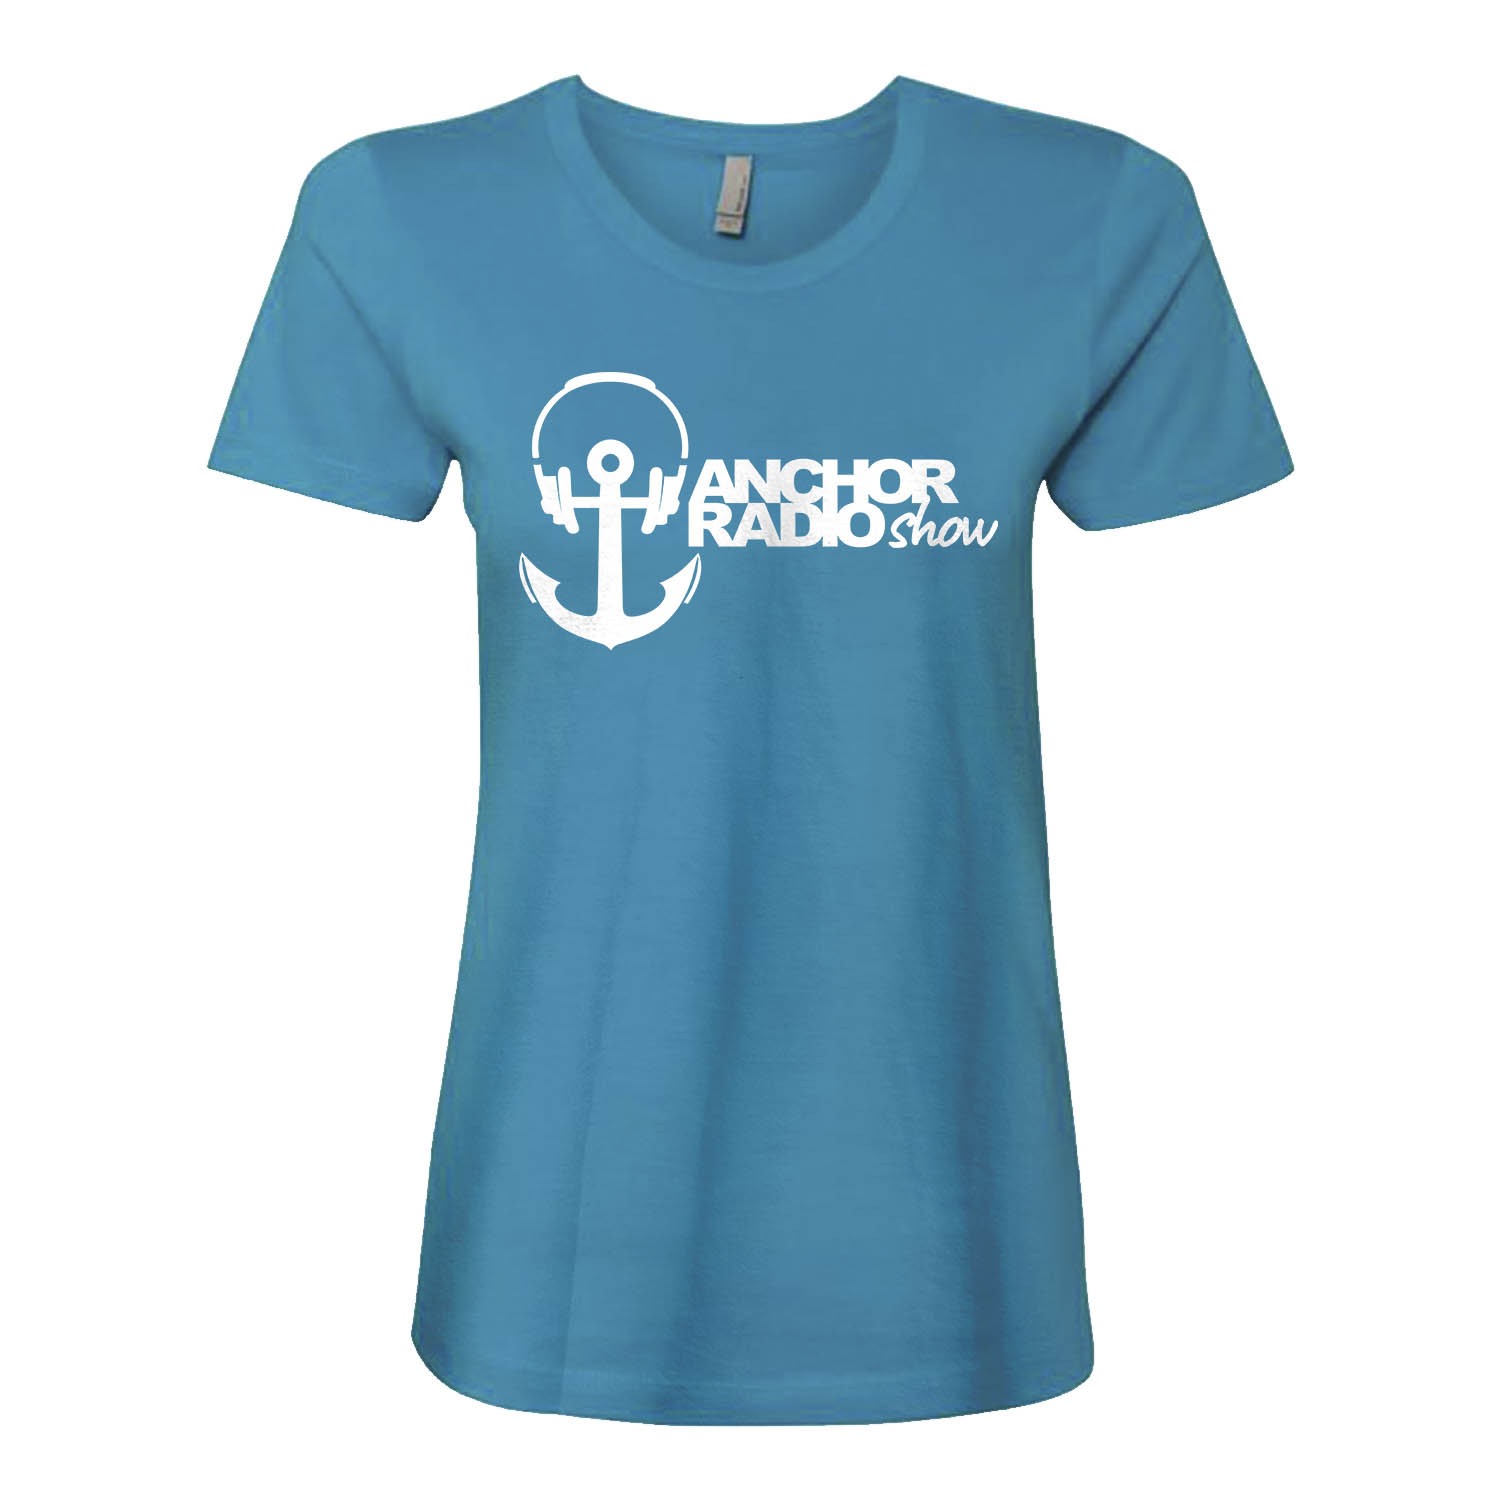 Anchor Radio Show Ladies Fitted T-shirt, The Troprock Shop